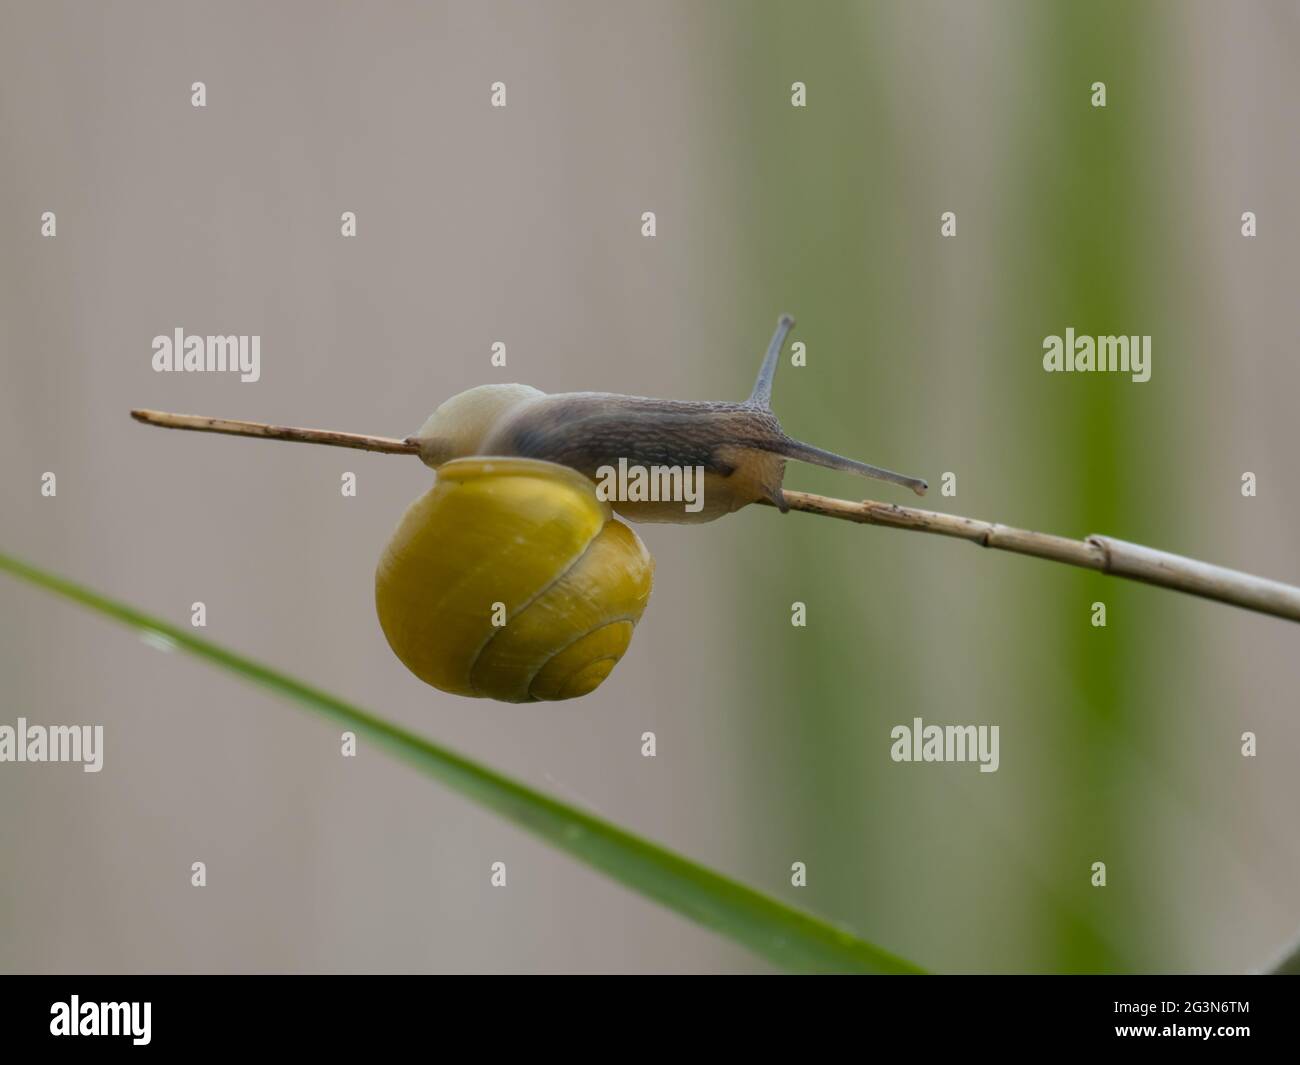 A yellow form of the White-lipped Snail or Garden Banded Snail, (Cepaea hortensis). Stock Photo